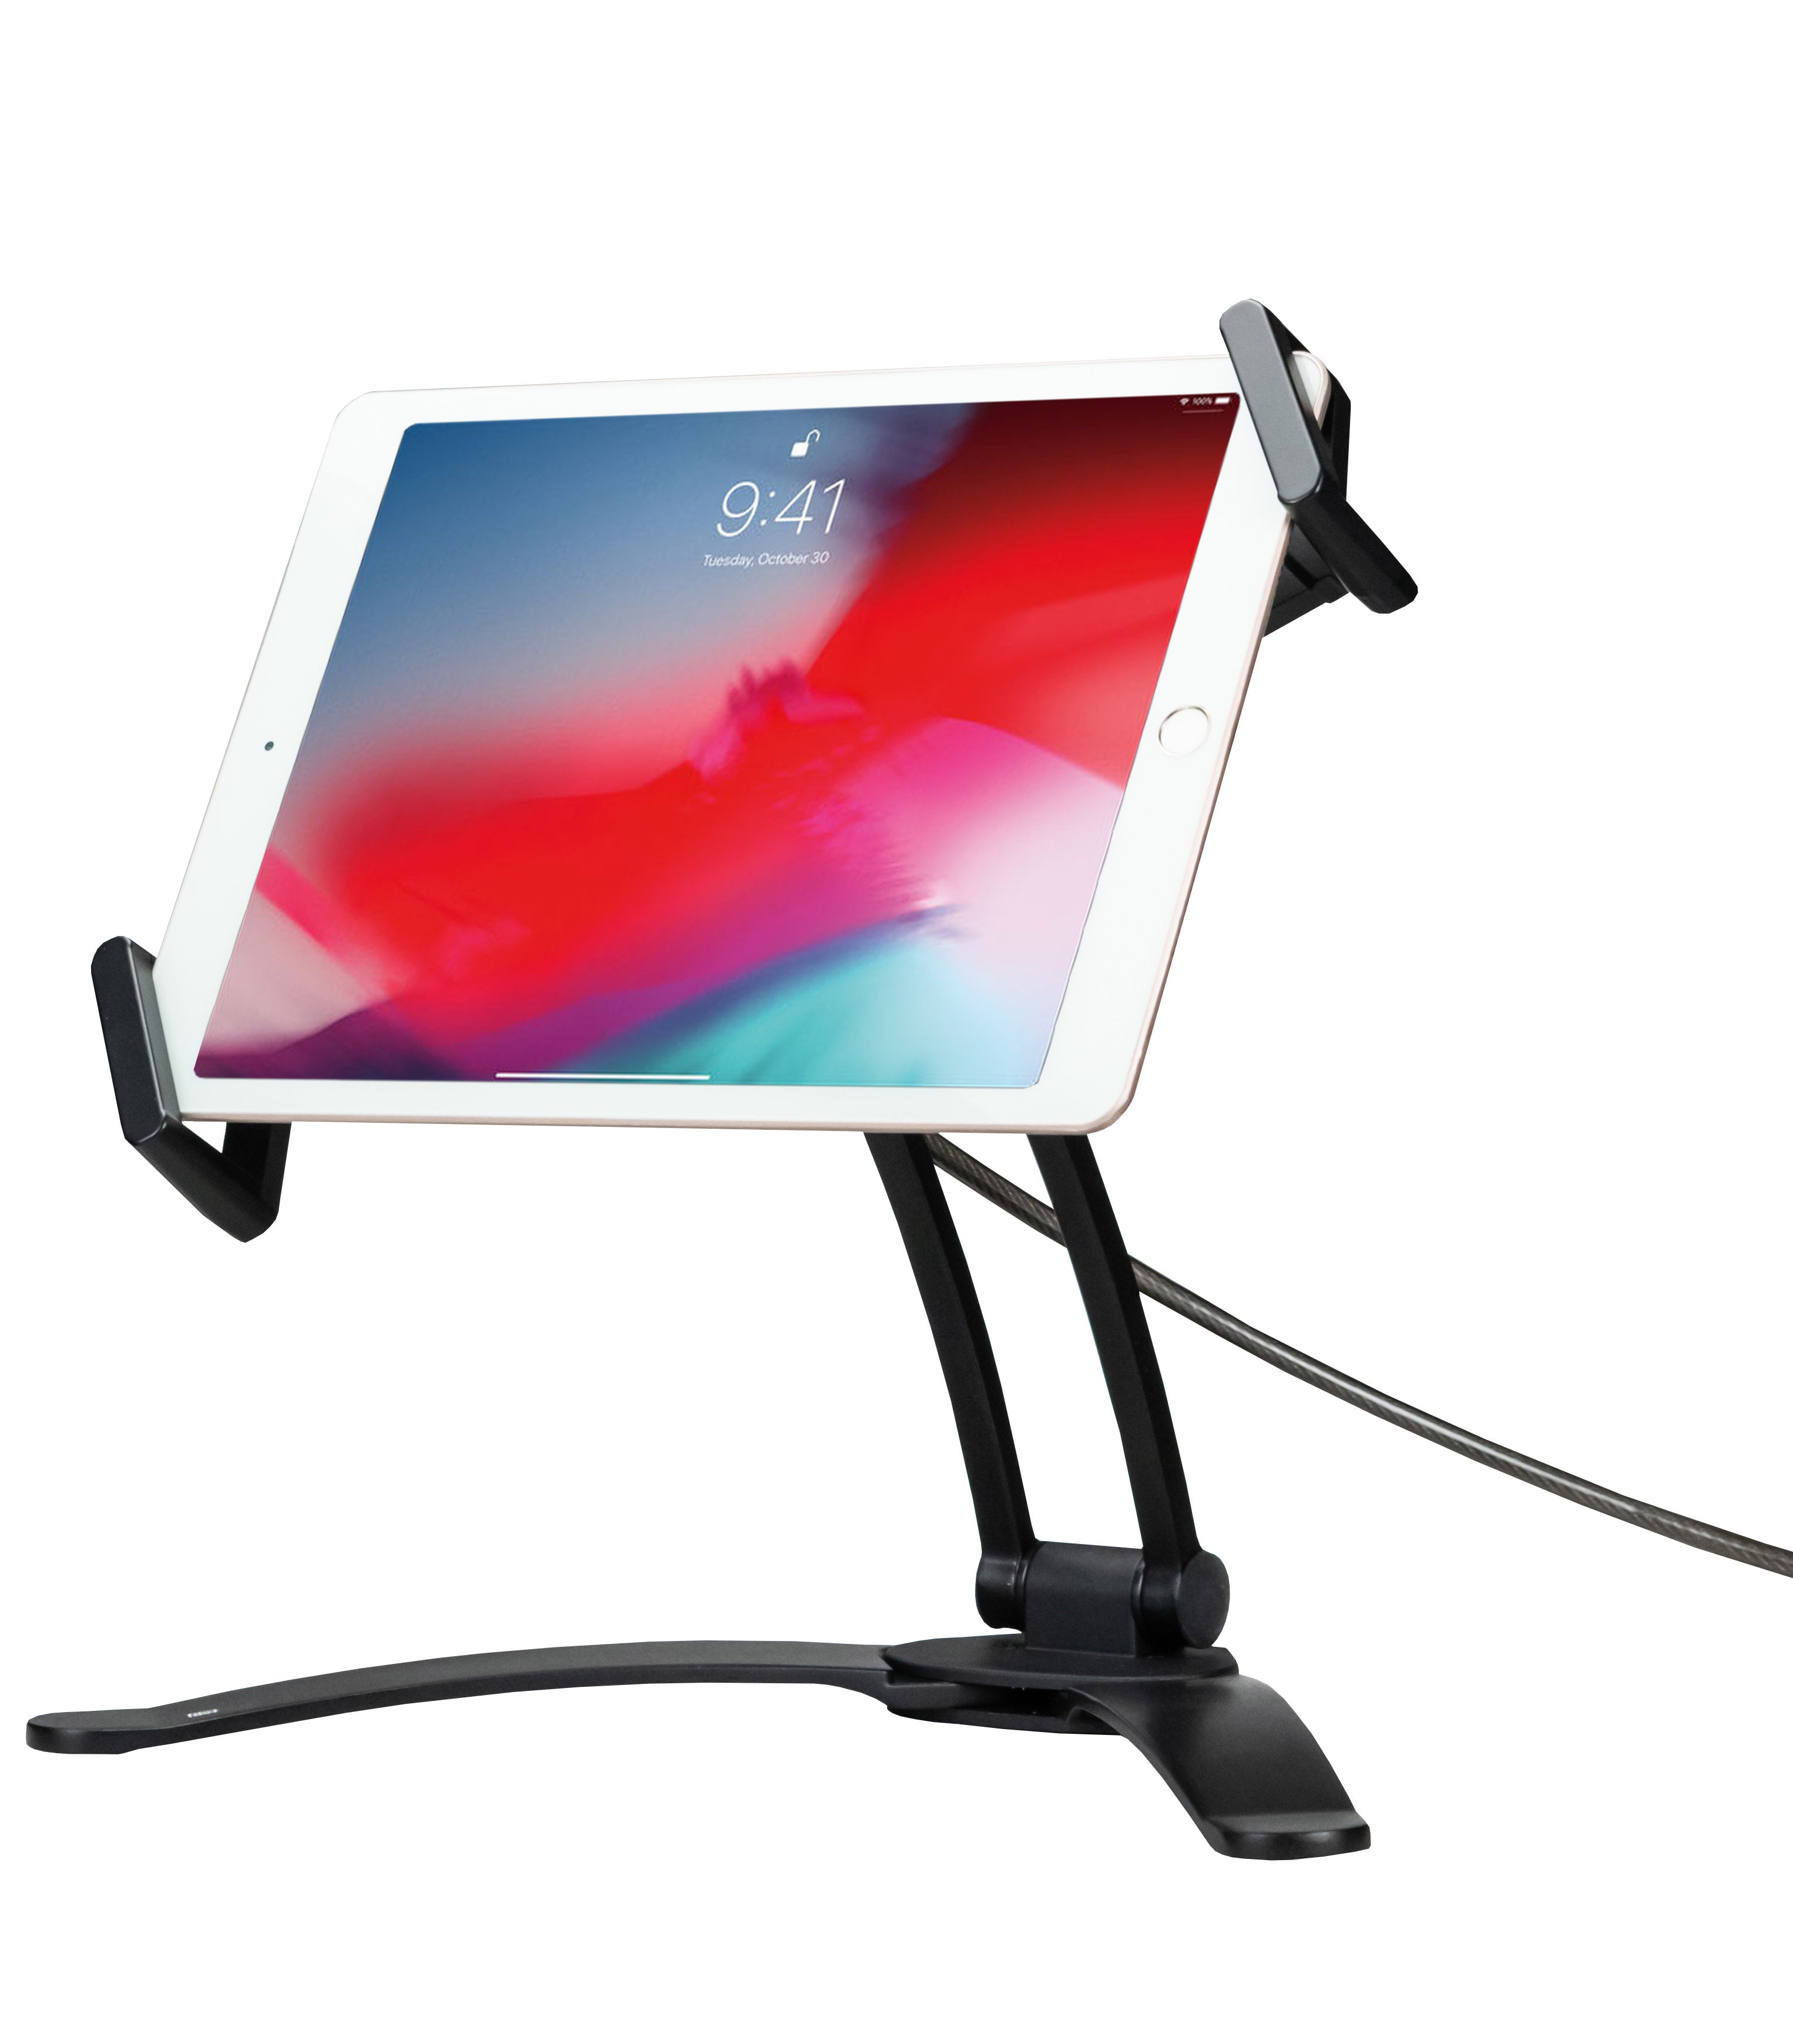 2-in-1 Security Multi-Flex Tablet Stand and Wall Mount for 7-14 Inch Tablets, including iPad 10.2-inch (7th/ 8th/ 9th Gen.)